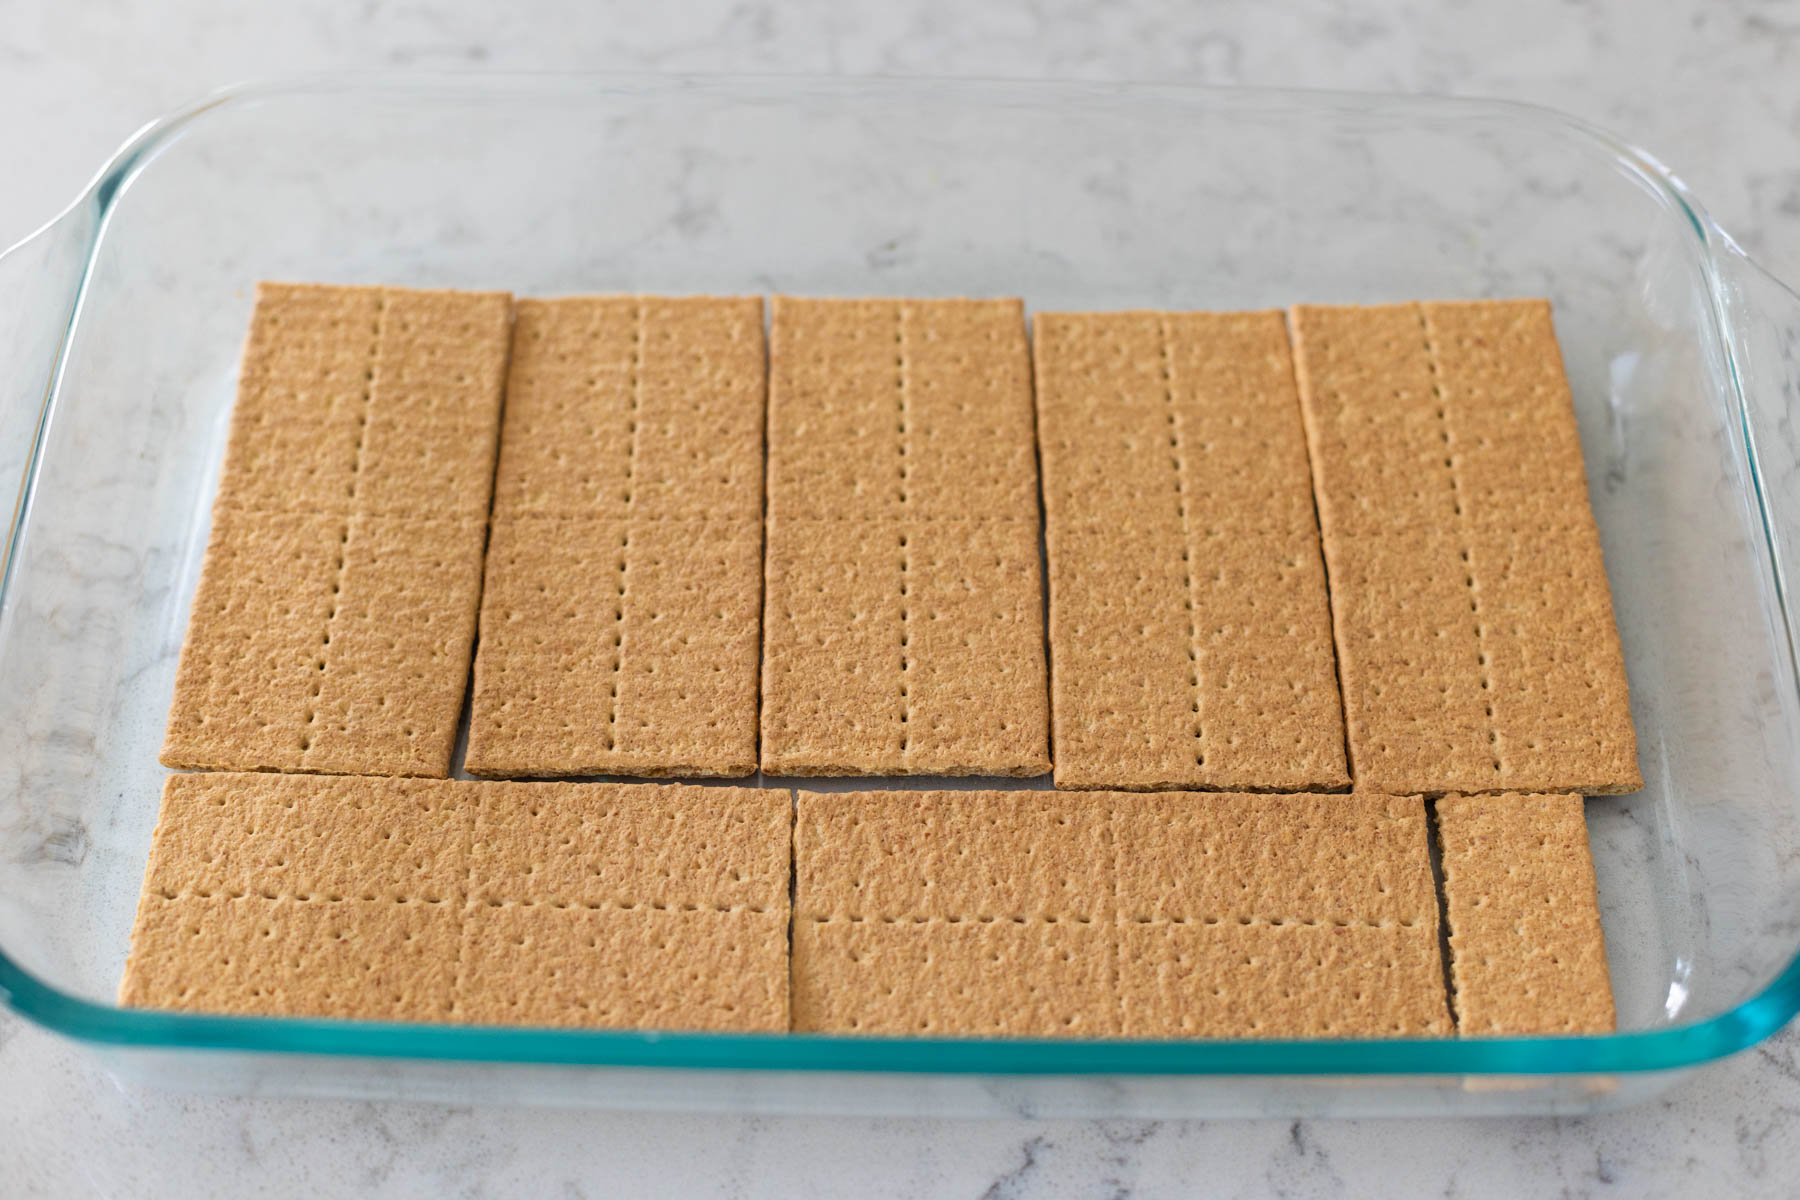 The graham crackers have been laid down in an even layer on the bottom of a 9x13-inch baking dish.